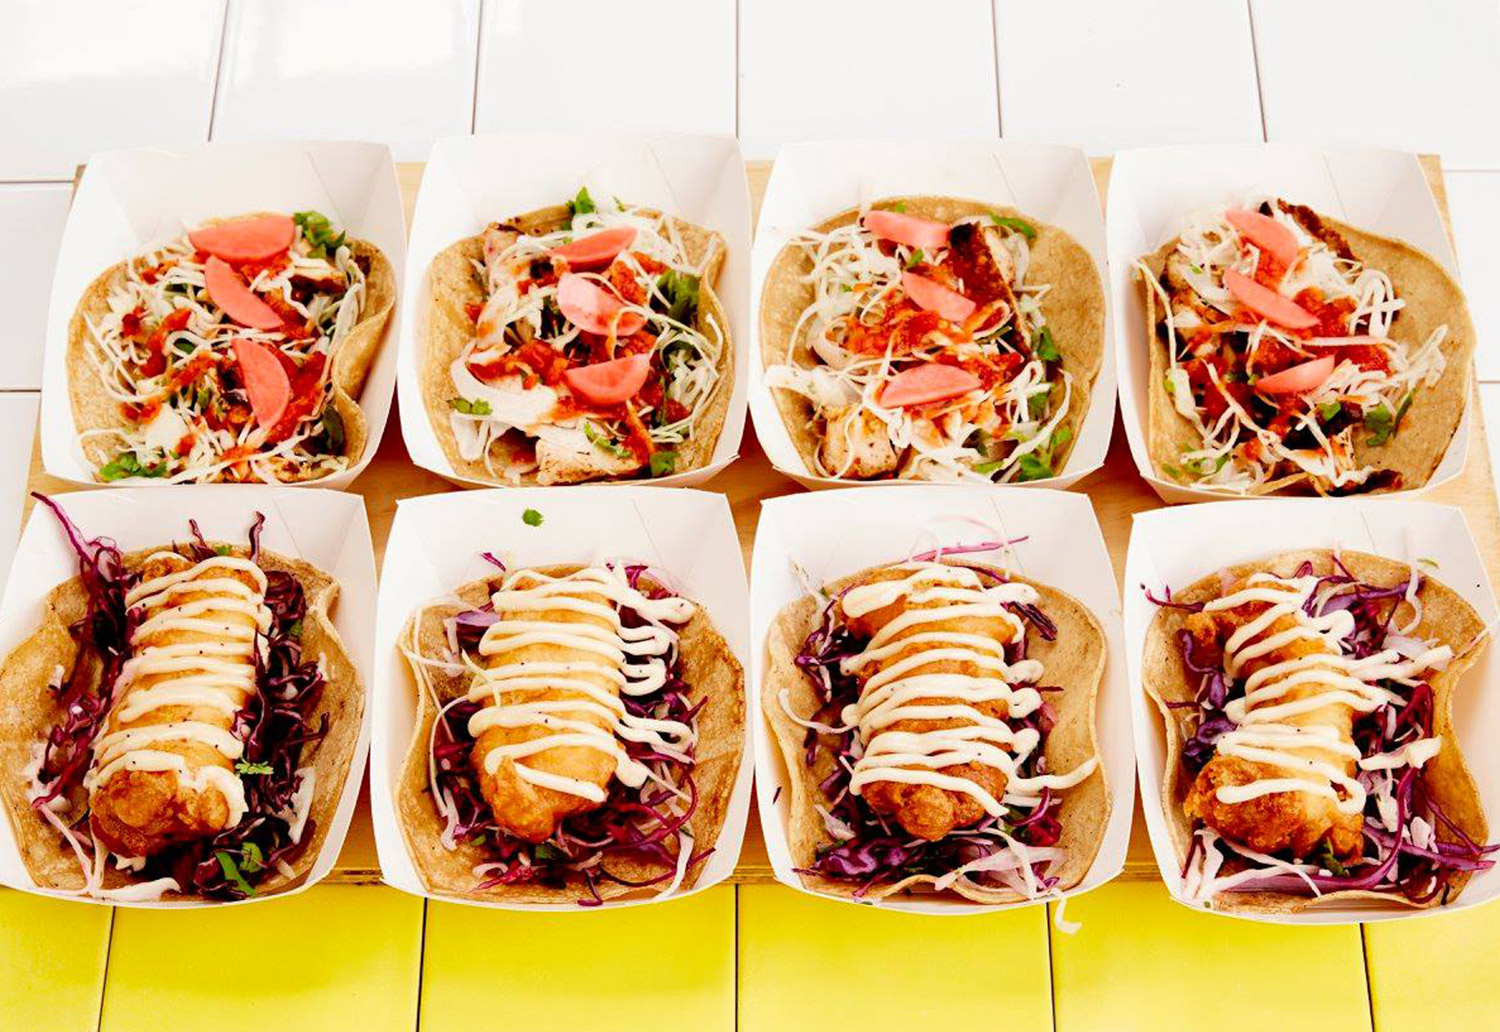 Image of Taco Truck food with Detpak food tray